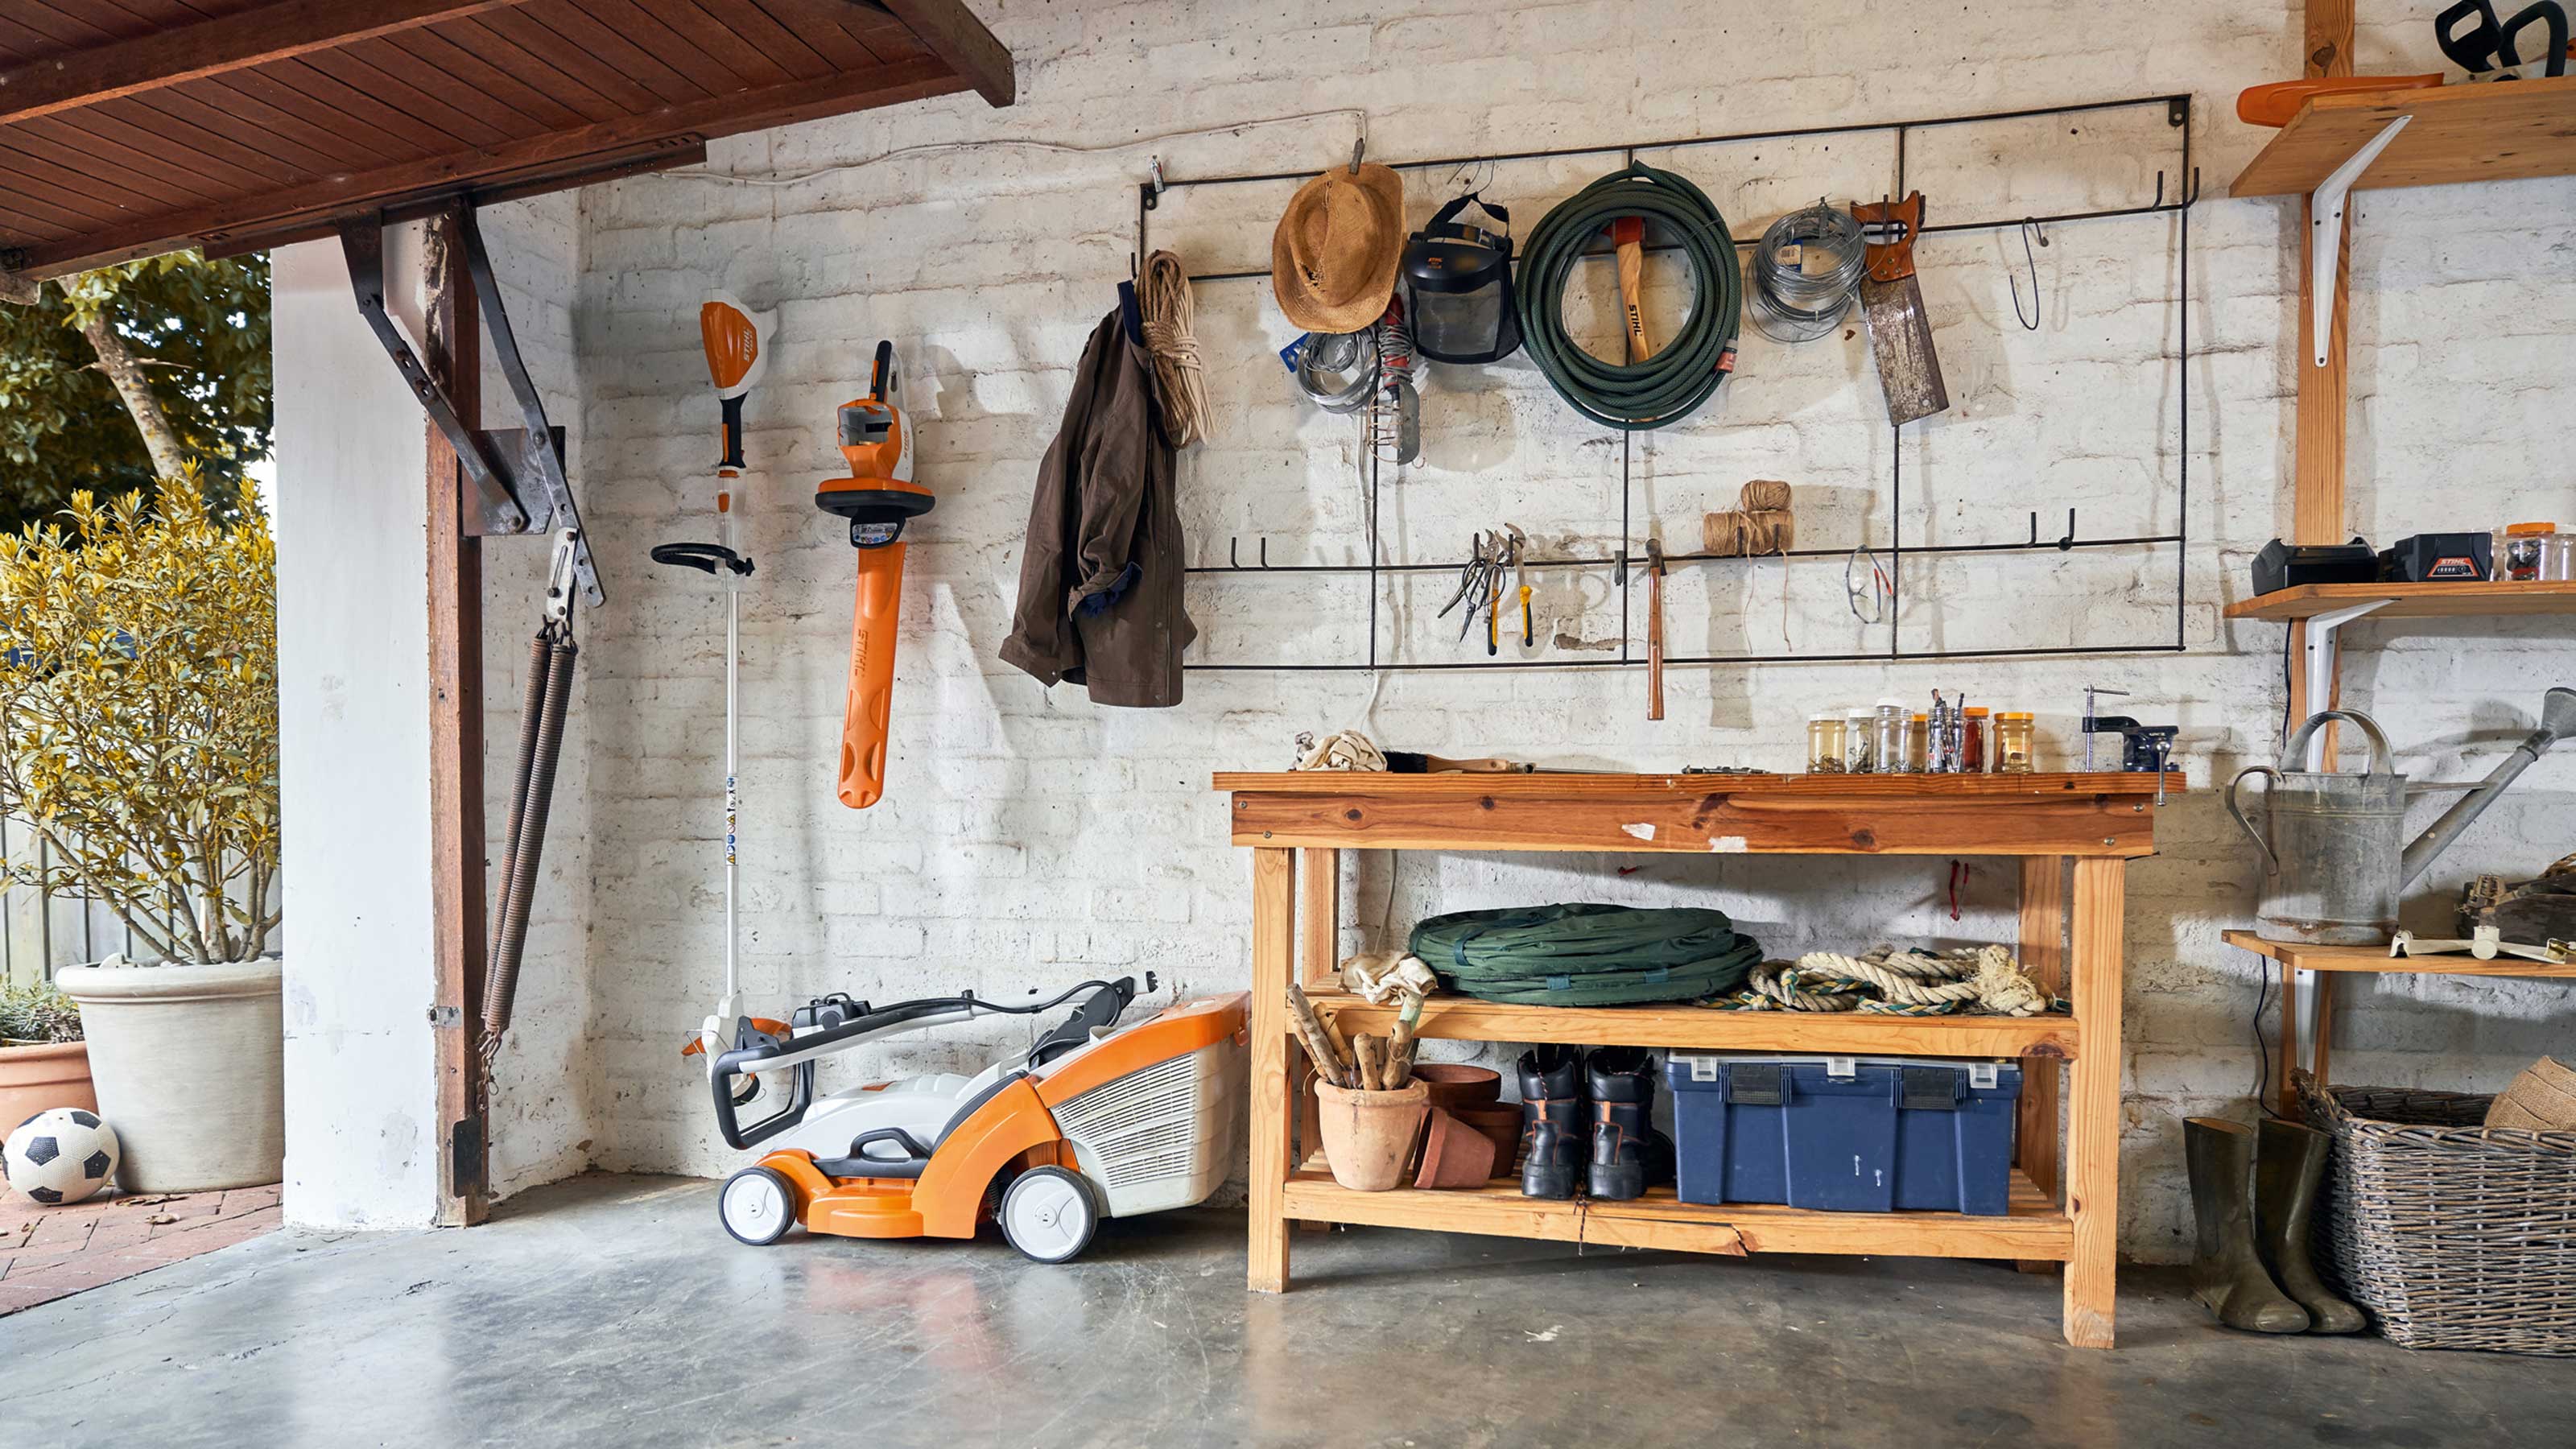 Garden tool storage ideas: 11 ways to keep your tools safe and organized